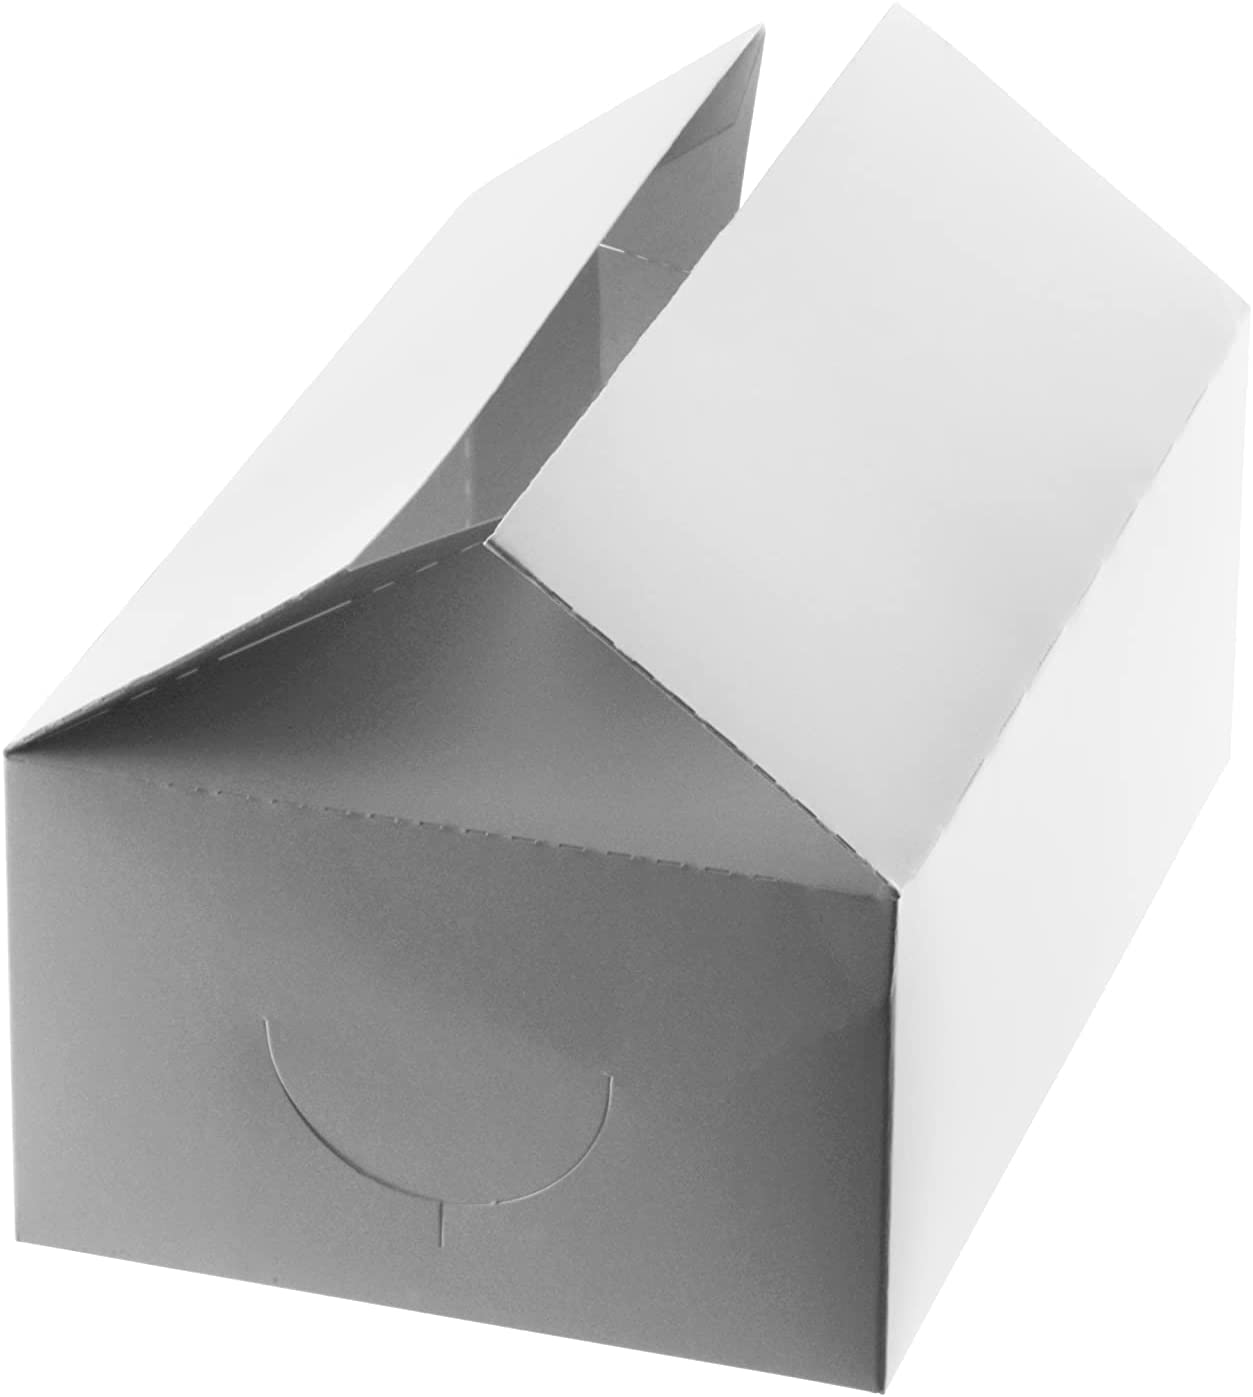 economical bulk wholesale ecoquality restaurant fast food supplies nyc White Treat Flat Gift Boxes - 7 x 4 x 3 inches - Paper Snack Boxes, Flat Top Boxes, Barn Boxes - Bakery Box, White Gift Box, Birthday's, Weddings, Baby Shower Favor Box, To go Box, Chicken Box 